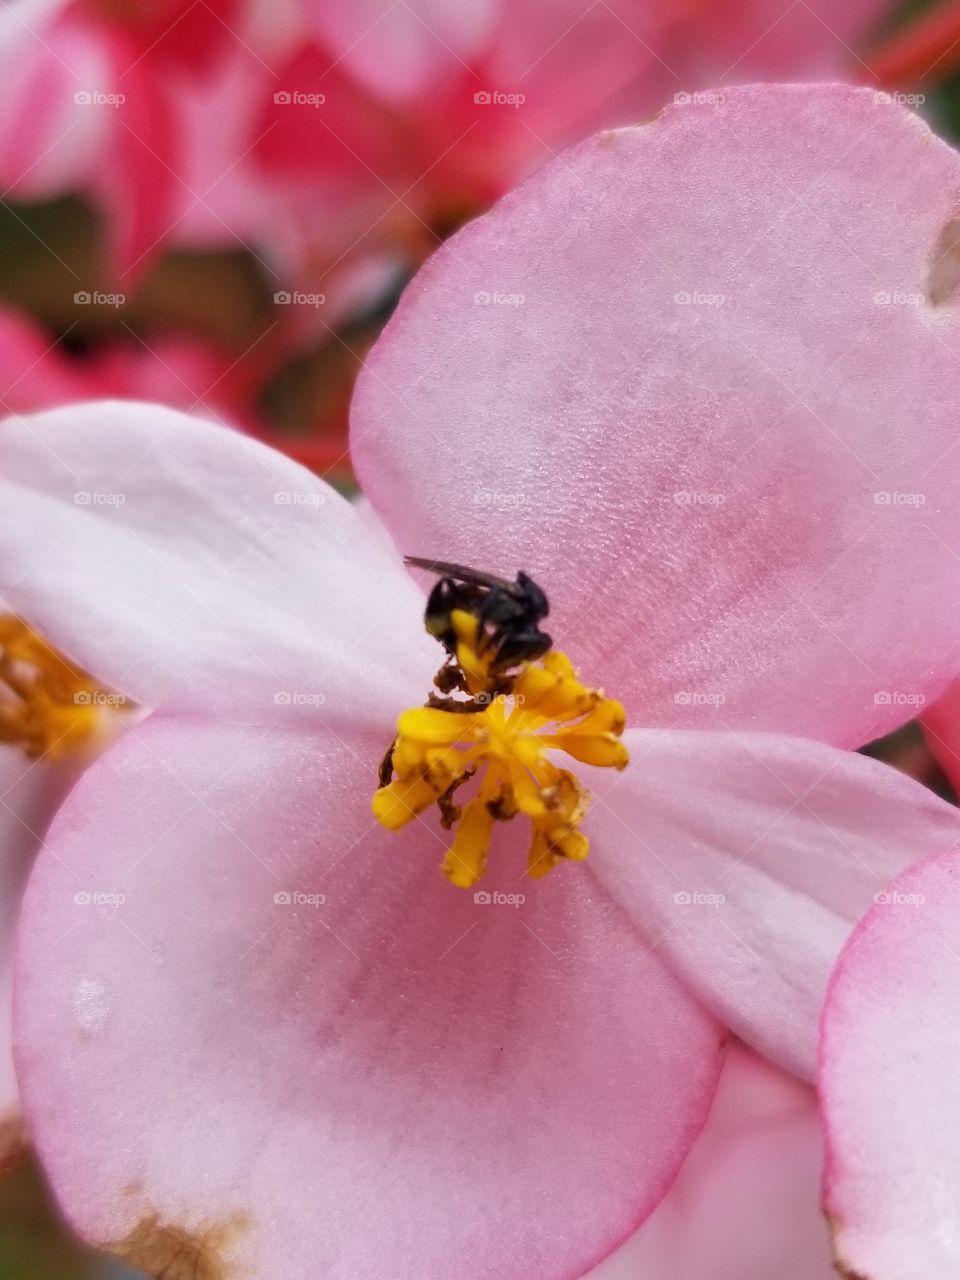 the pink flower and the bee